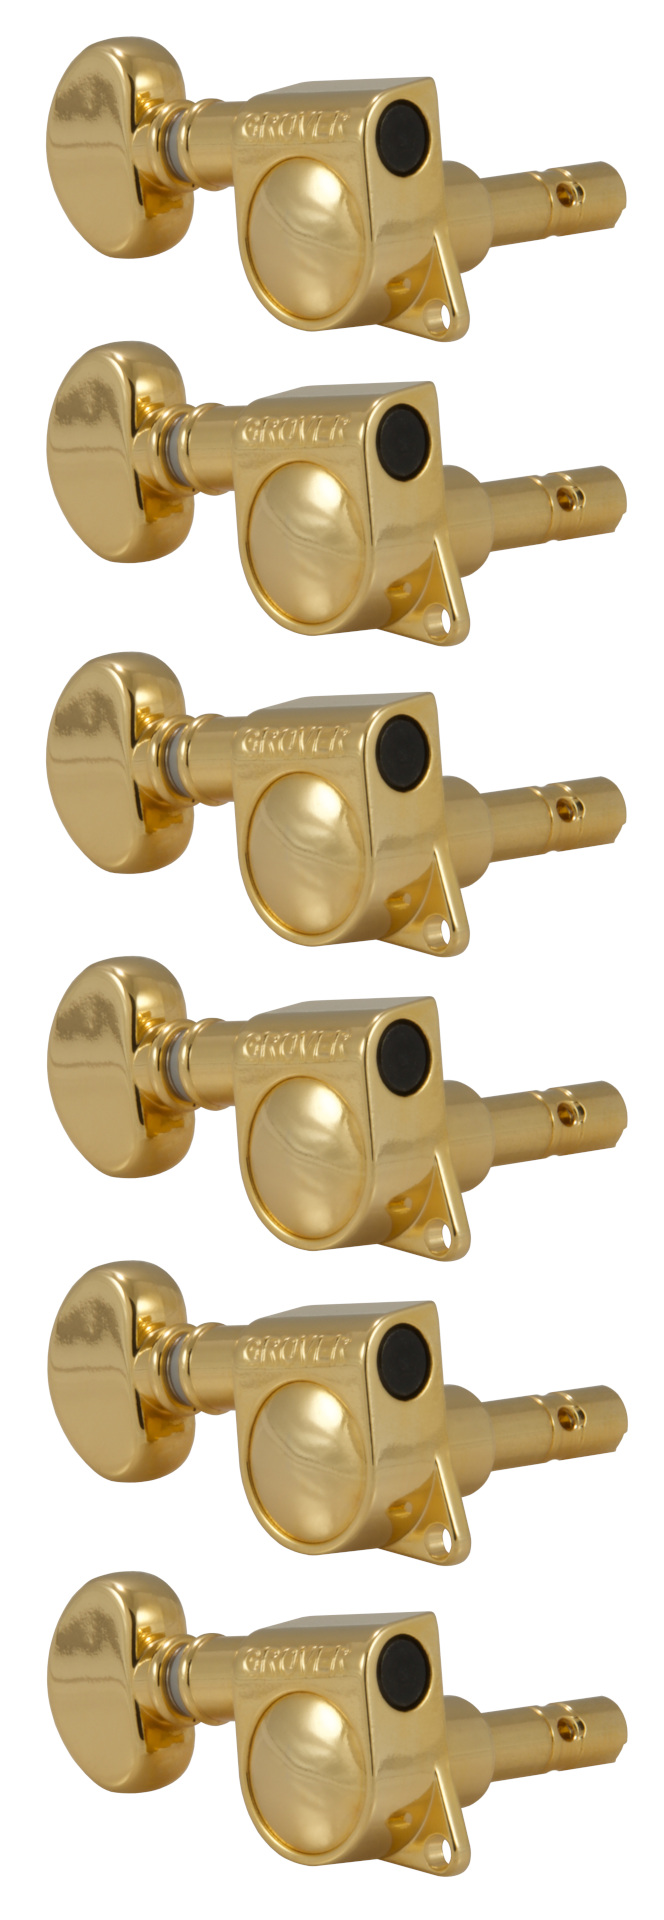 Grover 406GL6 Mini Locking Rotomatics with Round Button - Guitar Machine Heads, 6-in-Line, Lefthand, Treble Side (Right) - Gold